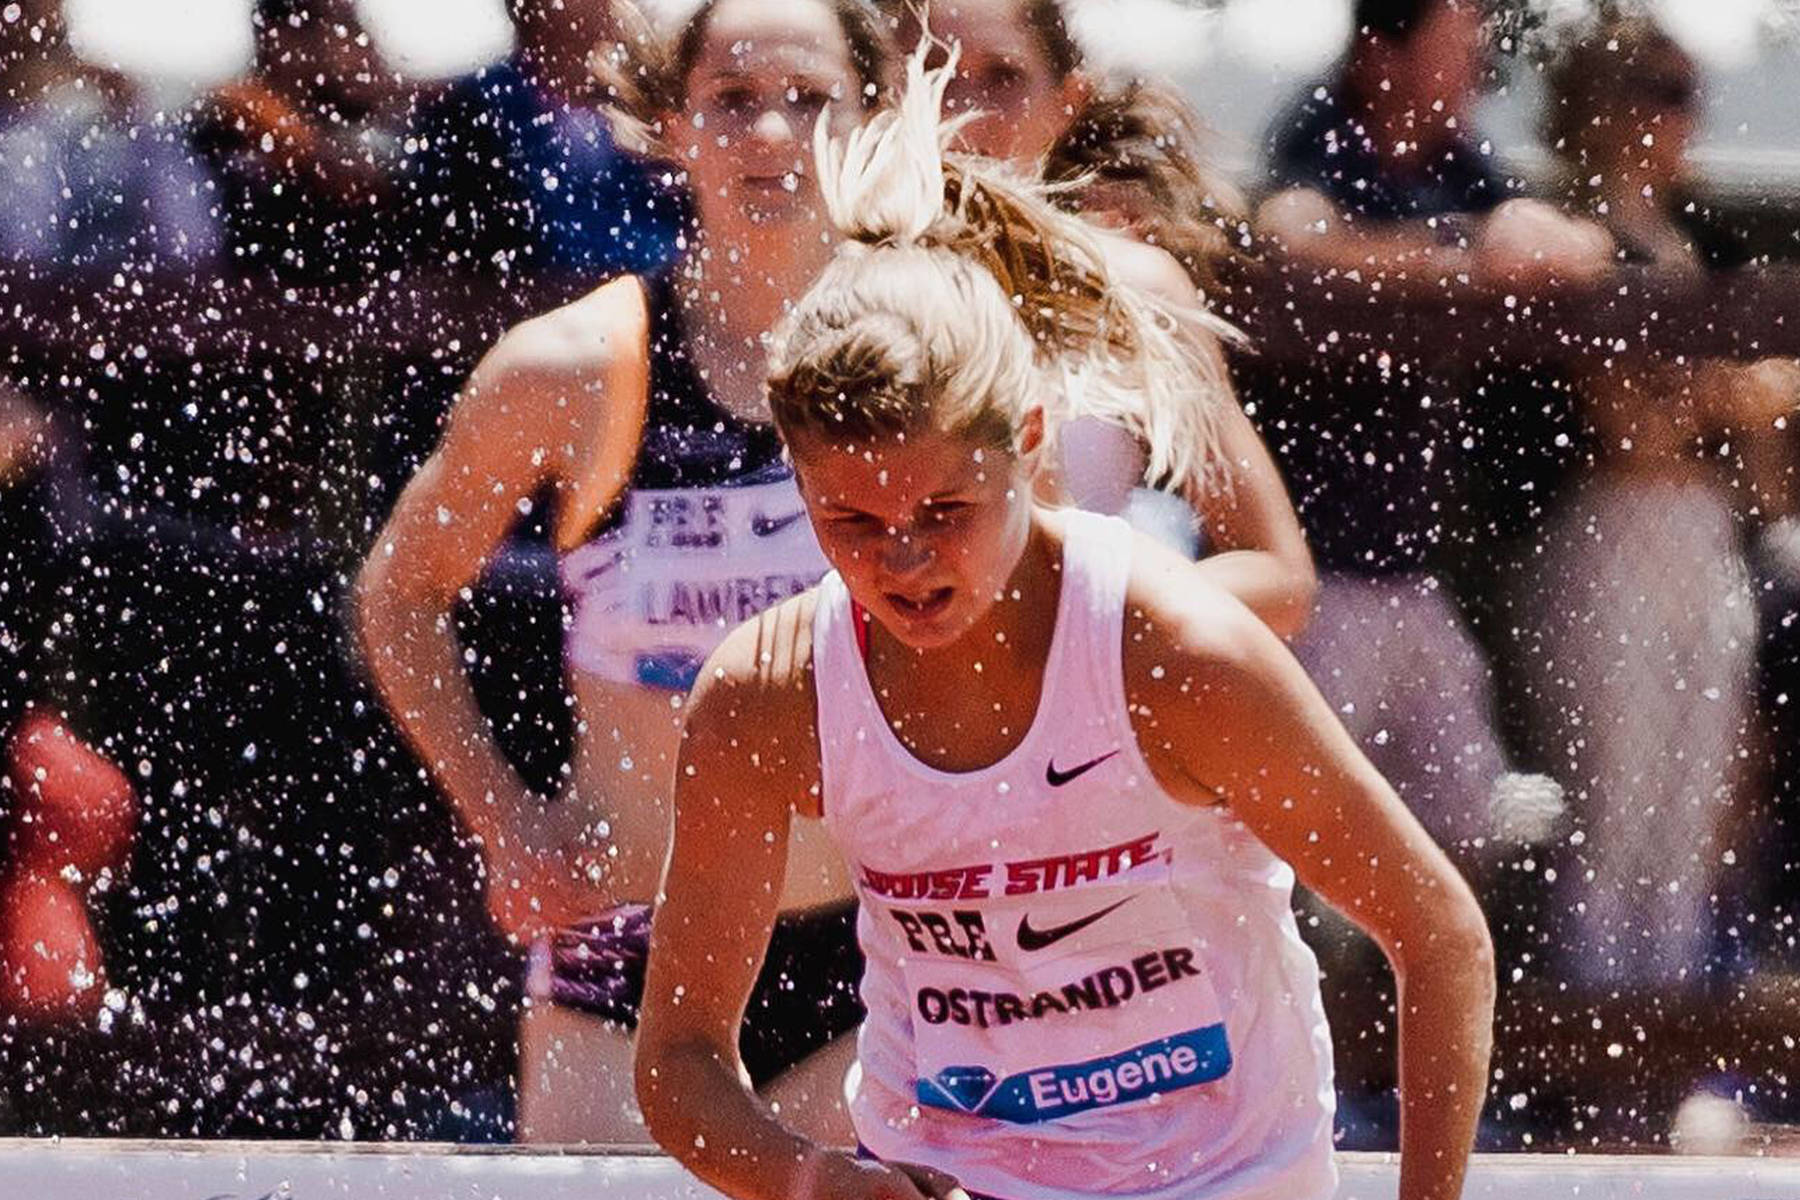 Boise State’s Allie Ostrander competes in the women’s 3,000-meter steeplechase final June 30 at the Prefontaine Classic at Stanford University in California. (Photo taken by Cortney White)